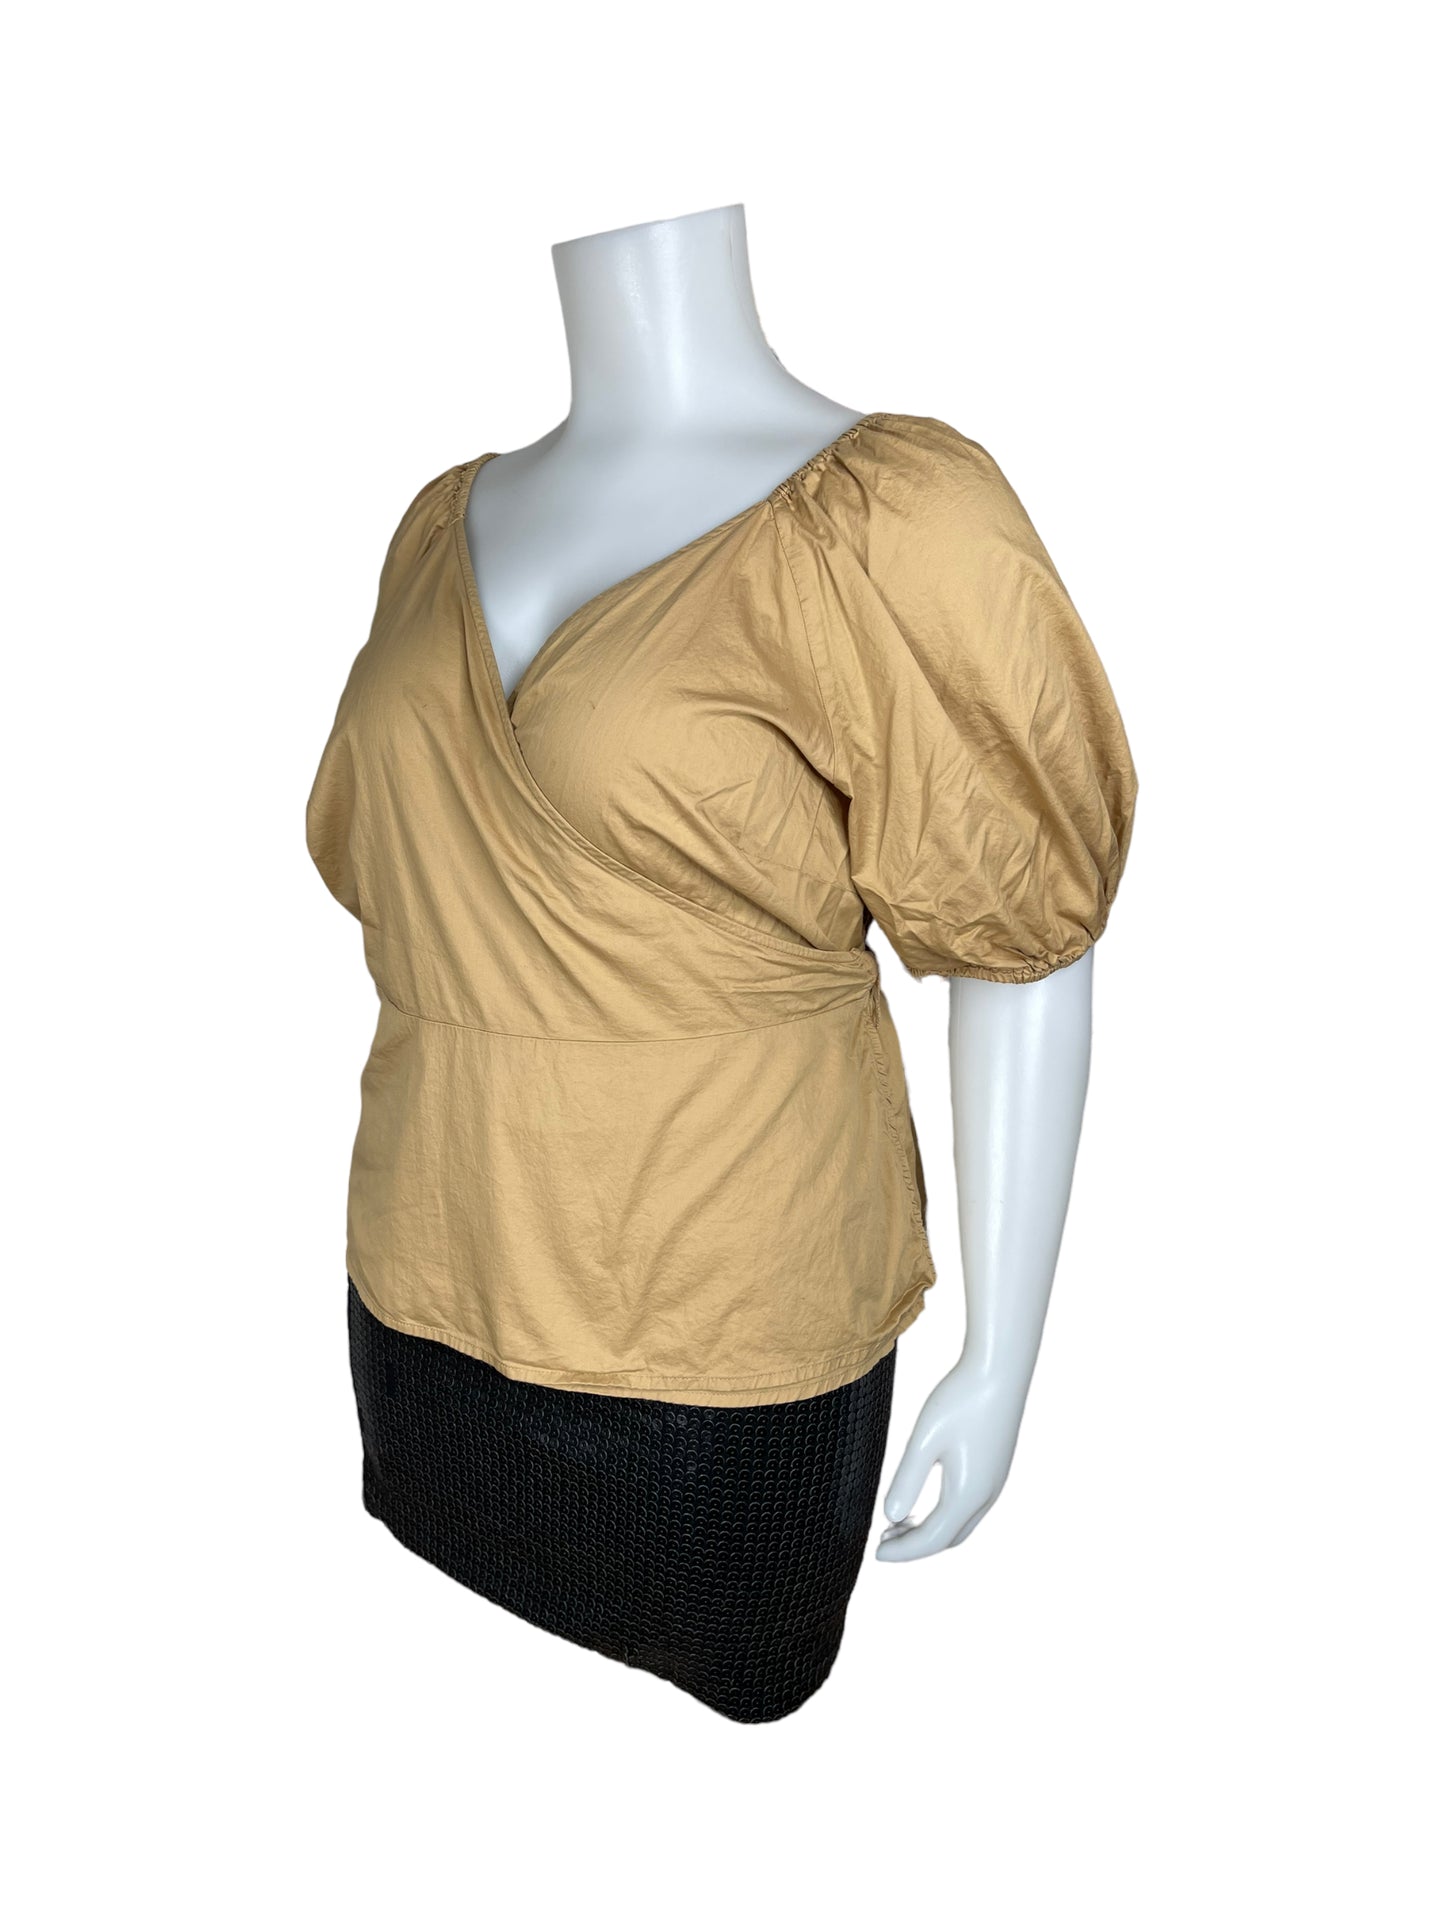 “Old Navy” Gold Wrap Blouse (3X)